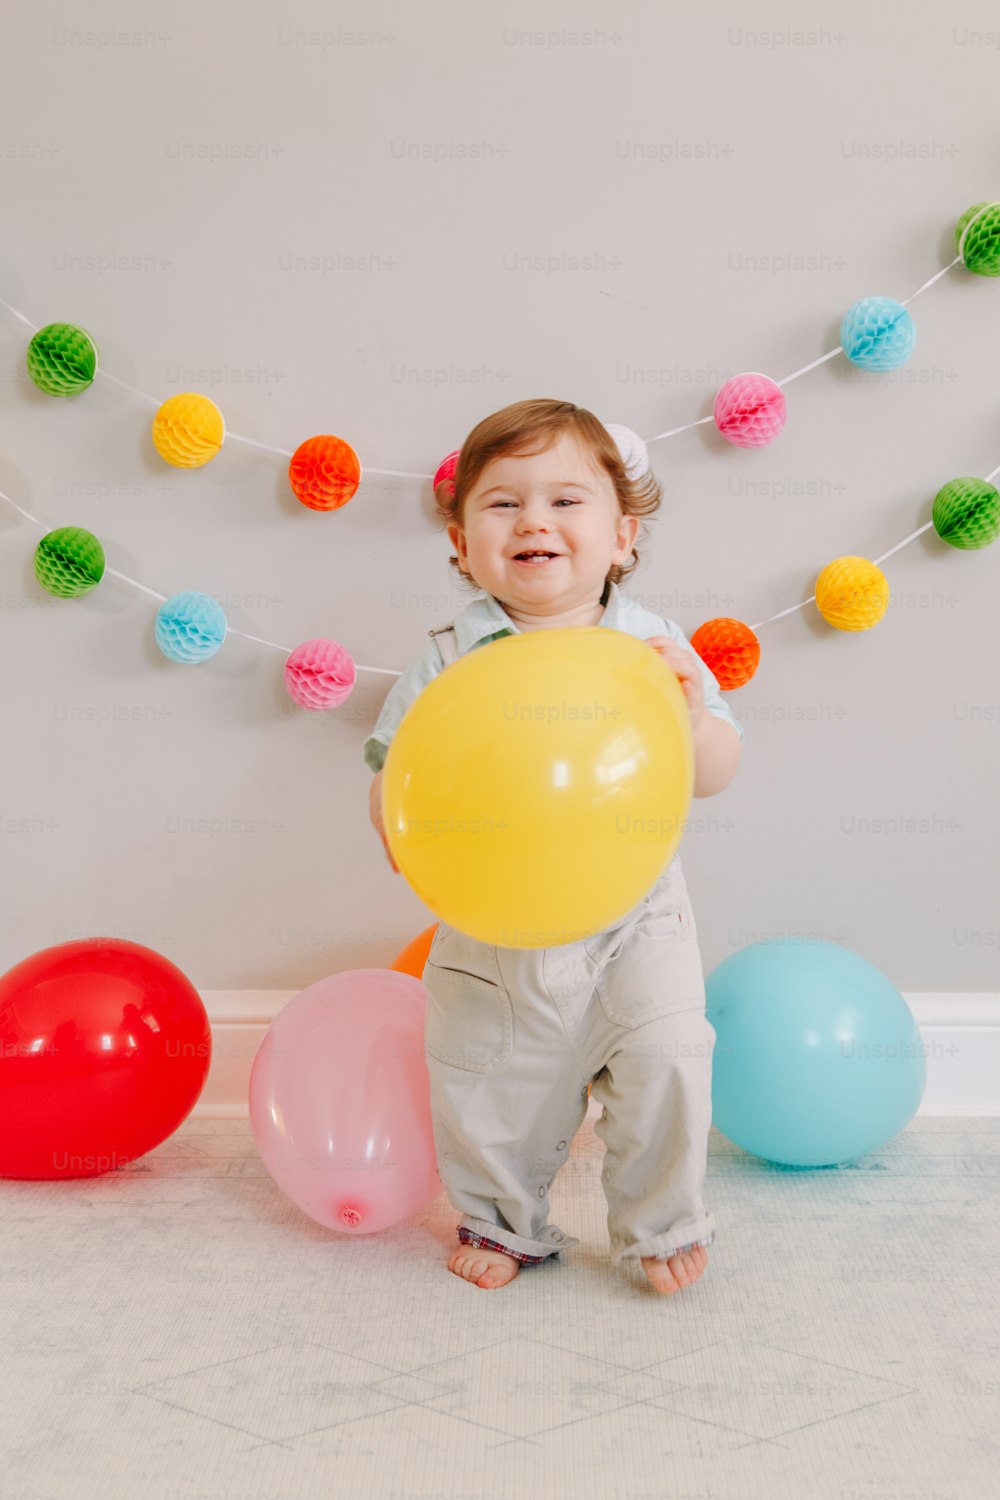 Funny Caucasian baby boy celebrating his first birthday. Excited child kid toddler playing with colorful balloons. Celebration of event or party indoors at home. Happy birthday lifestyle concept.